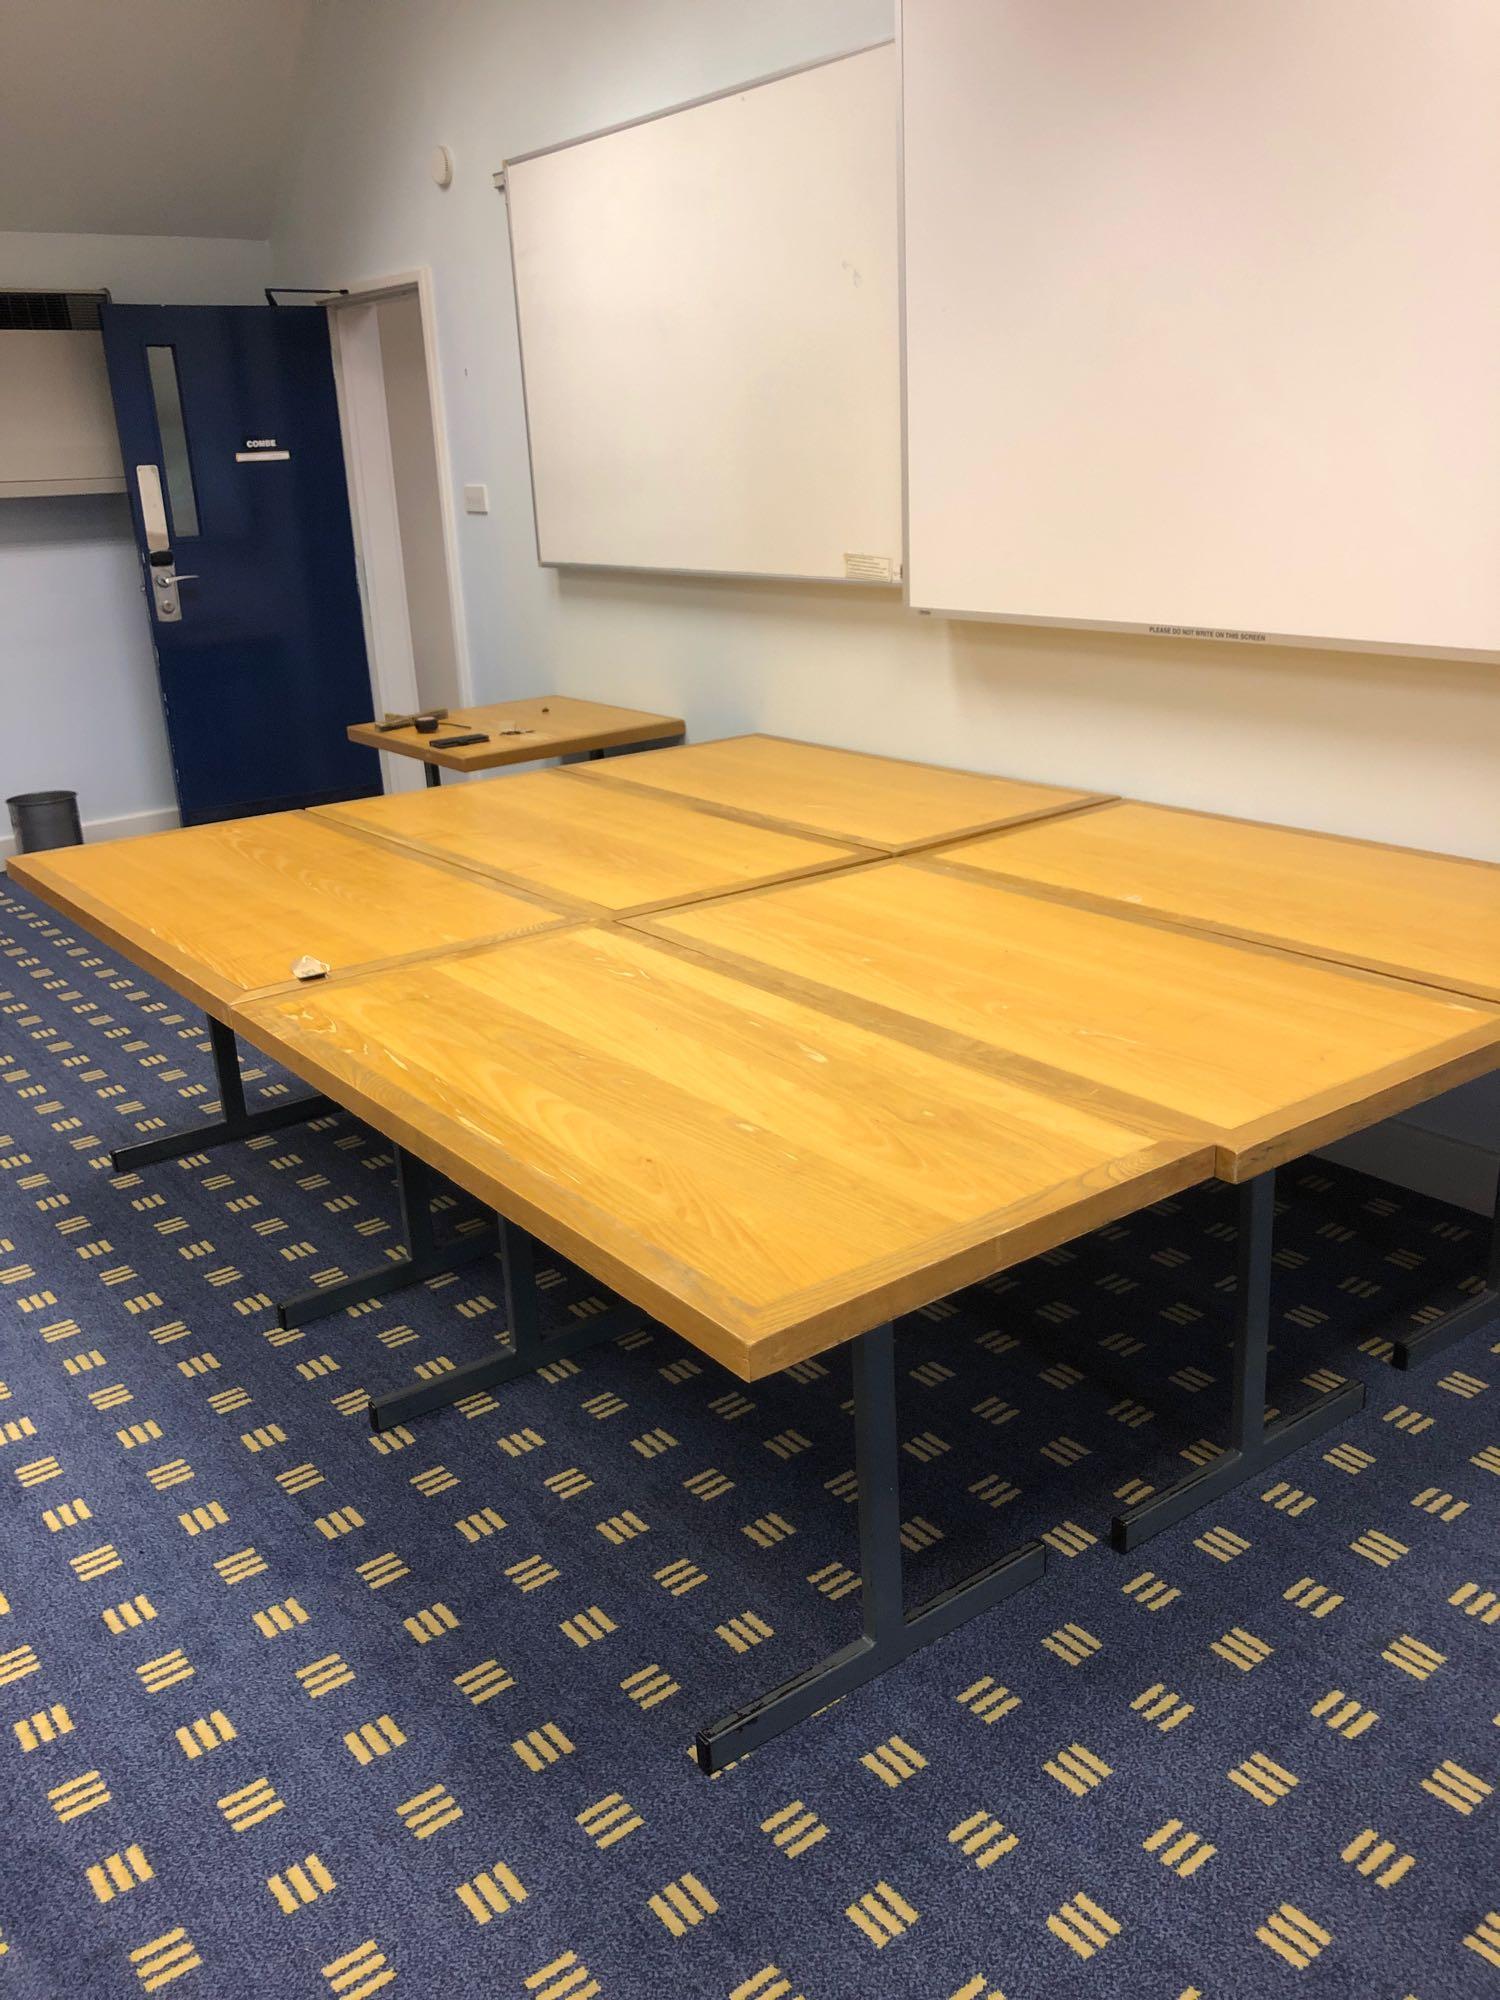 6x Wooden Conference Tables